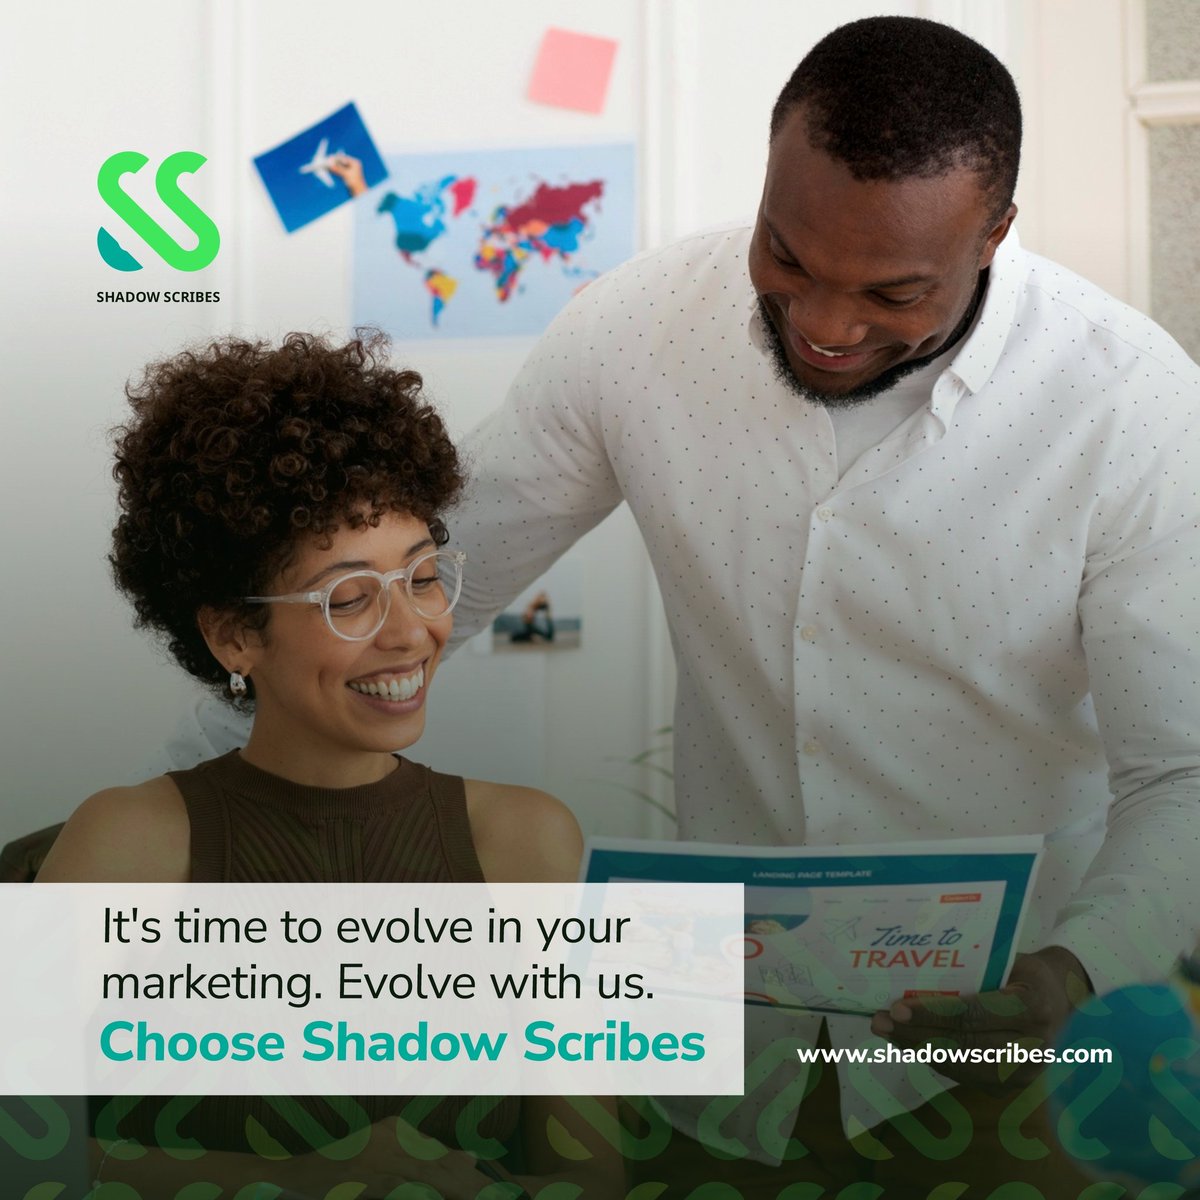 Shadow Scribes is the new catalyst for evolution in the marketing world. We are leading the charge, setting new standards, and rewriting the rules of engagement when we handle your brand.